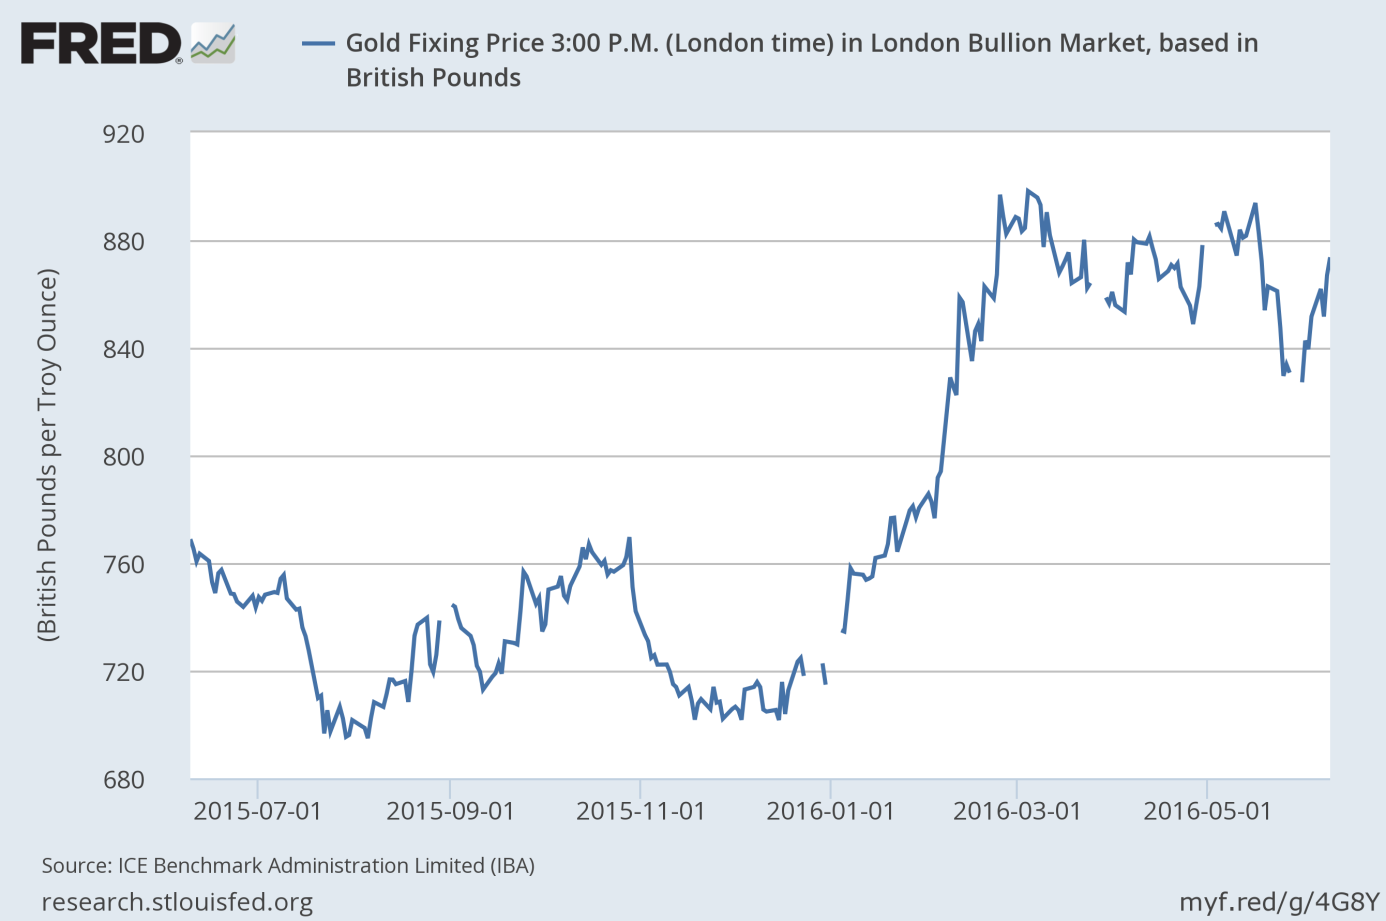 The price of gold in British pounds